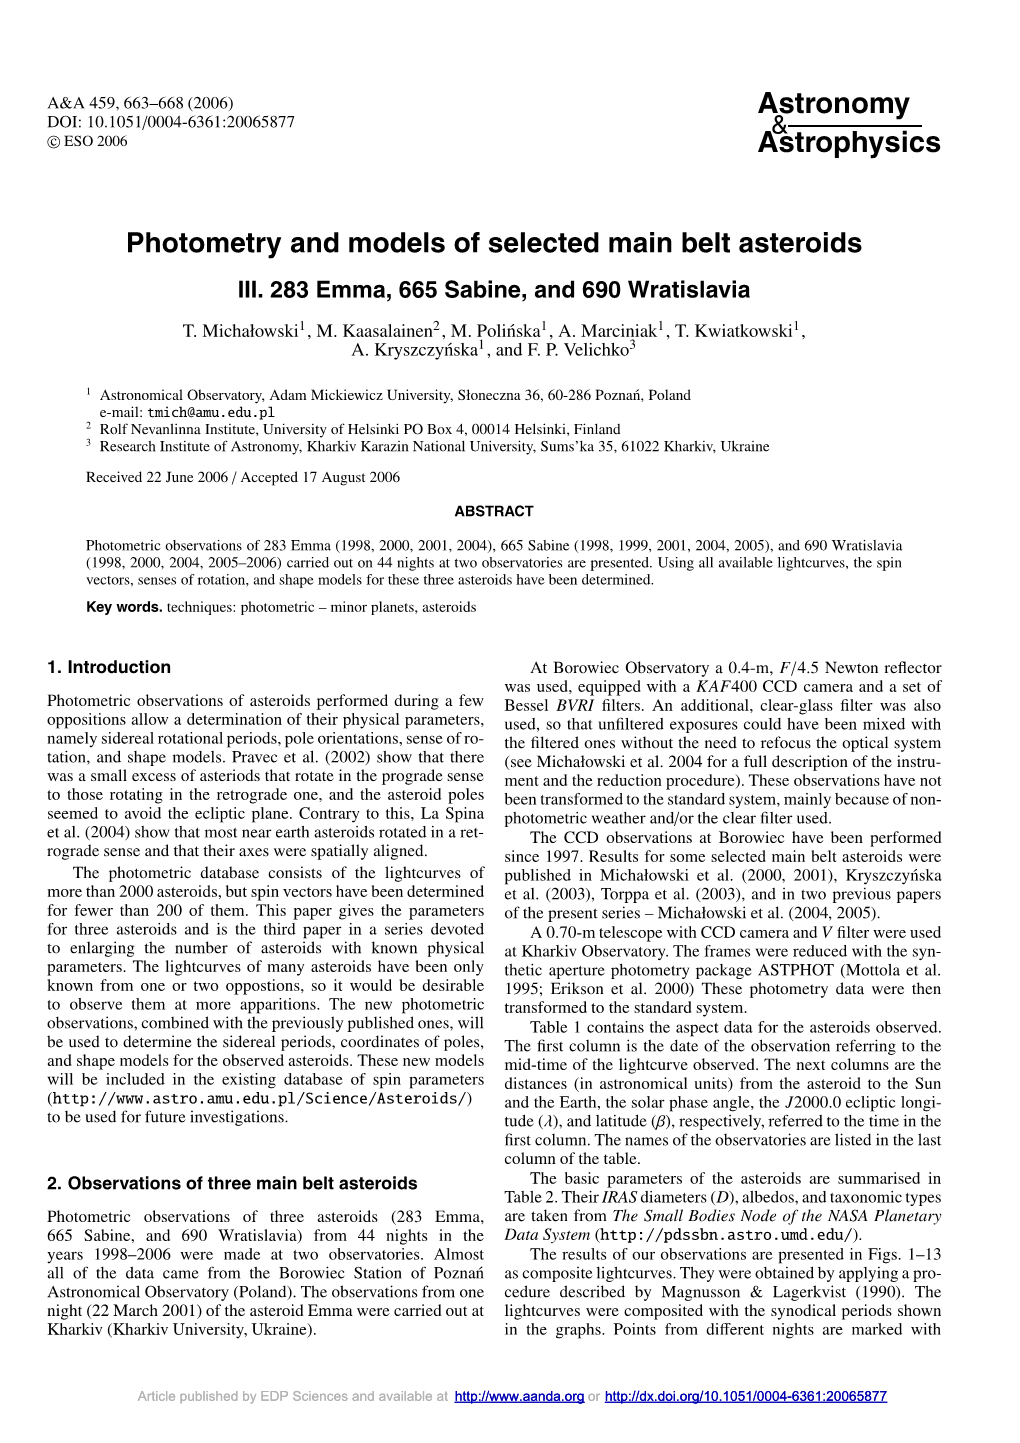 Photometry and Models of Selected Main Belt Asteroids III